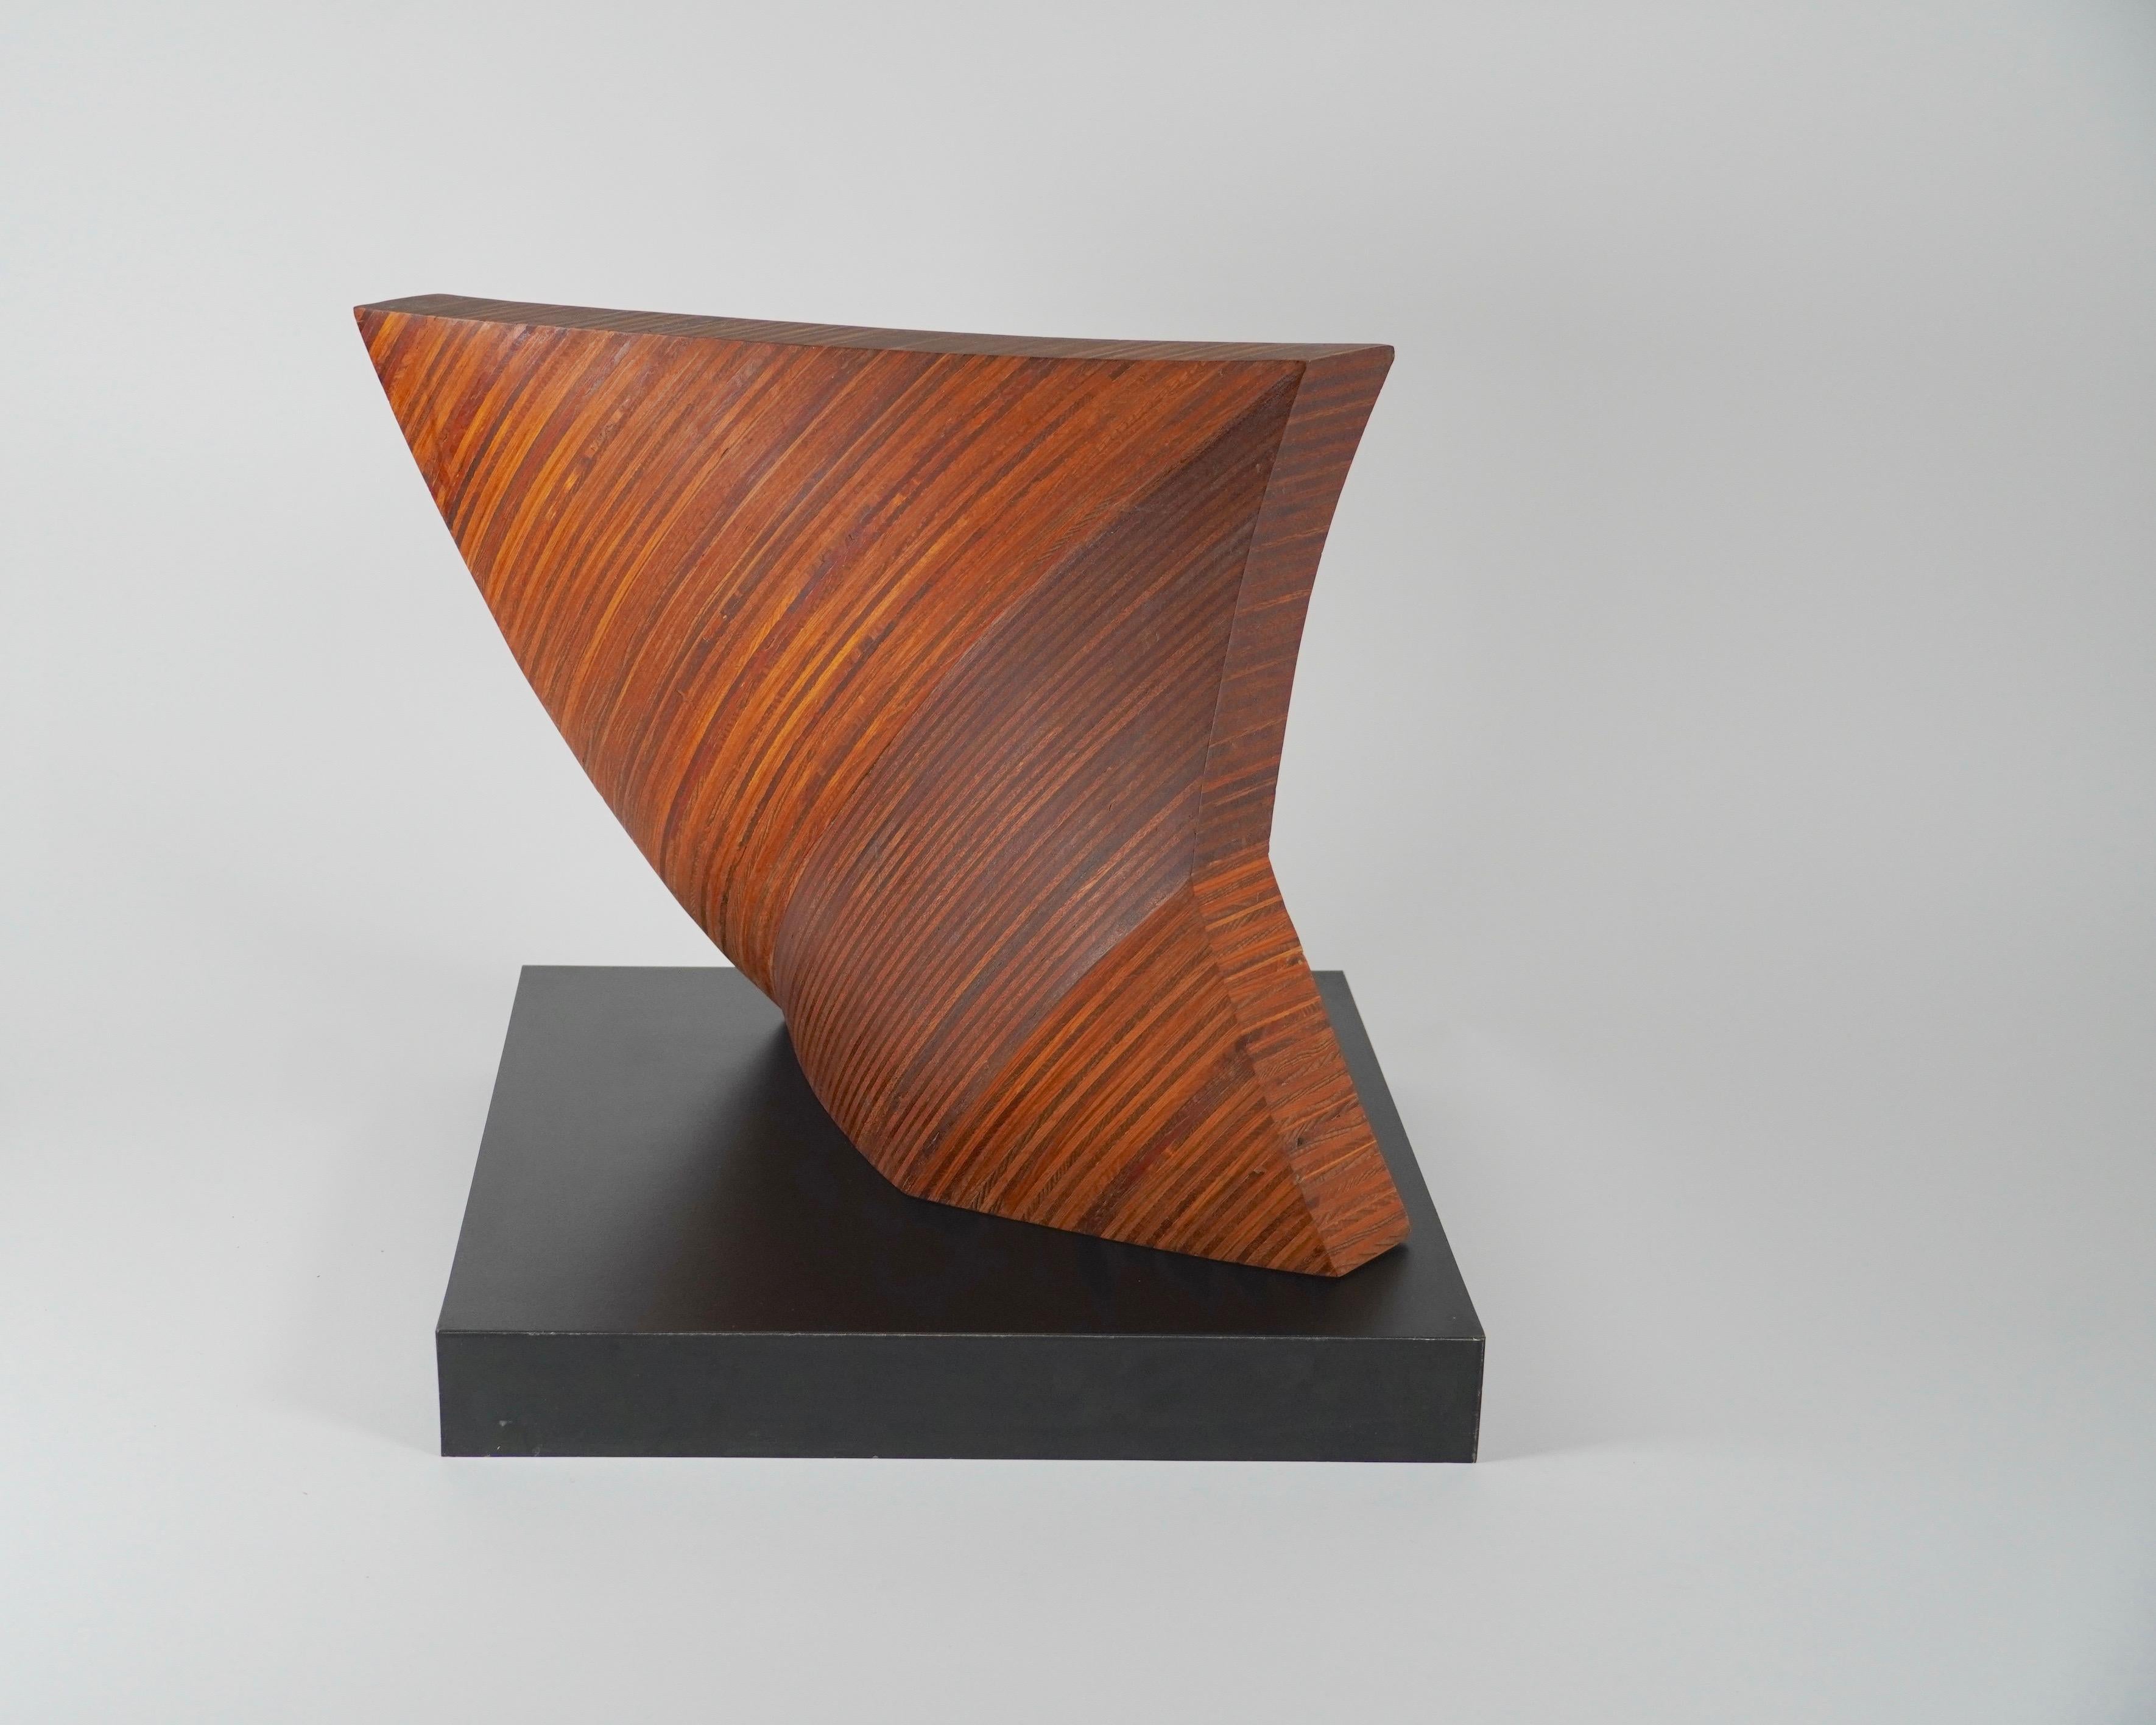 American Modernist Abstract Hand Carved Wooden Sculpture, circa 1970s